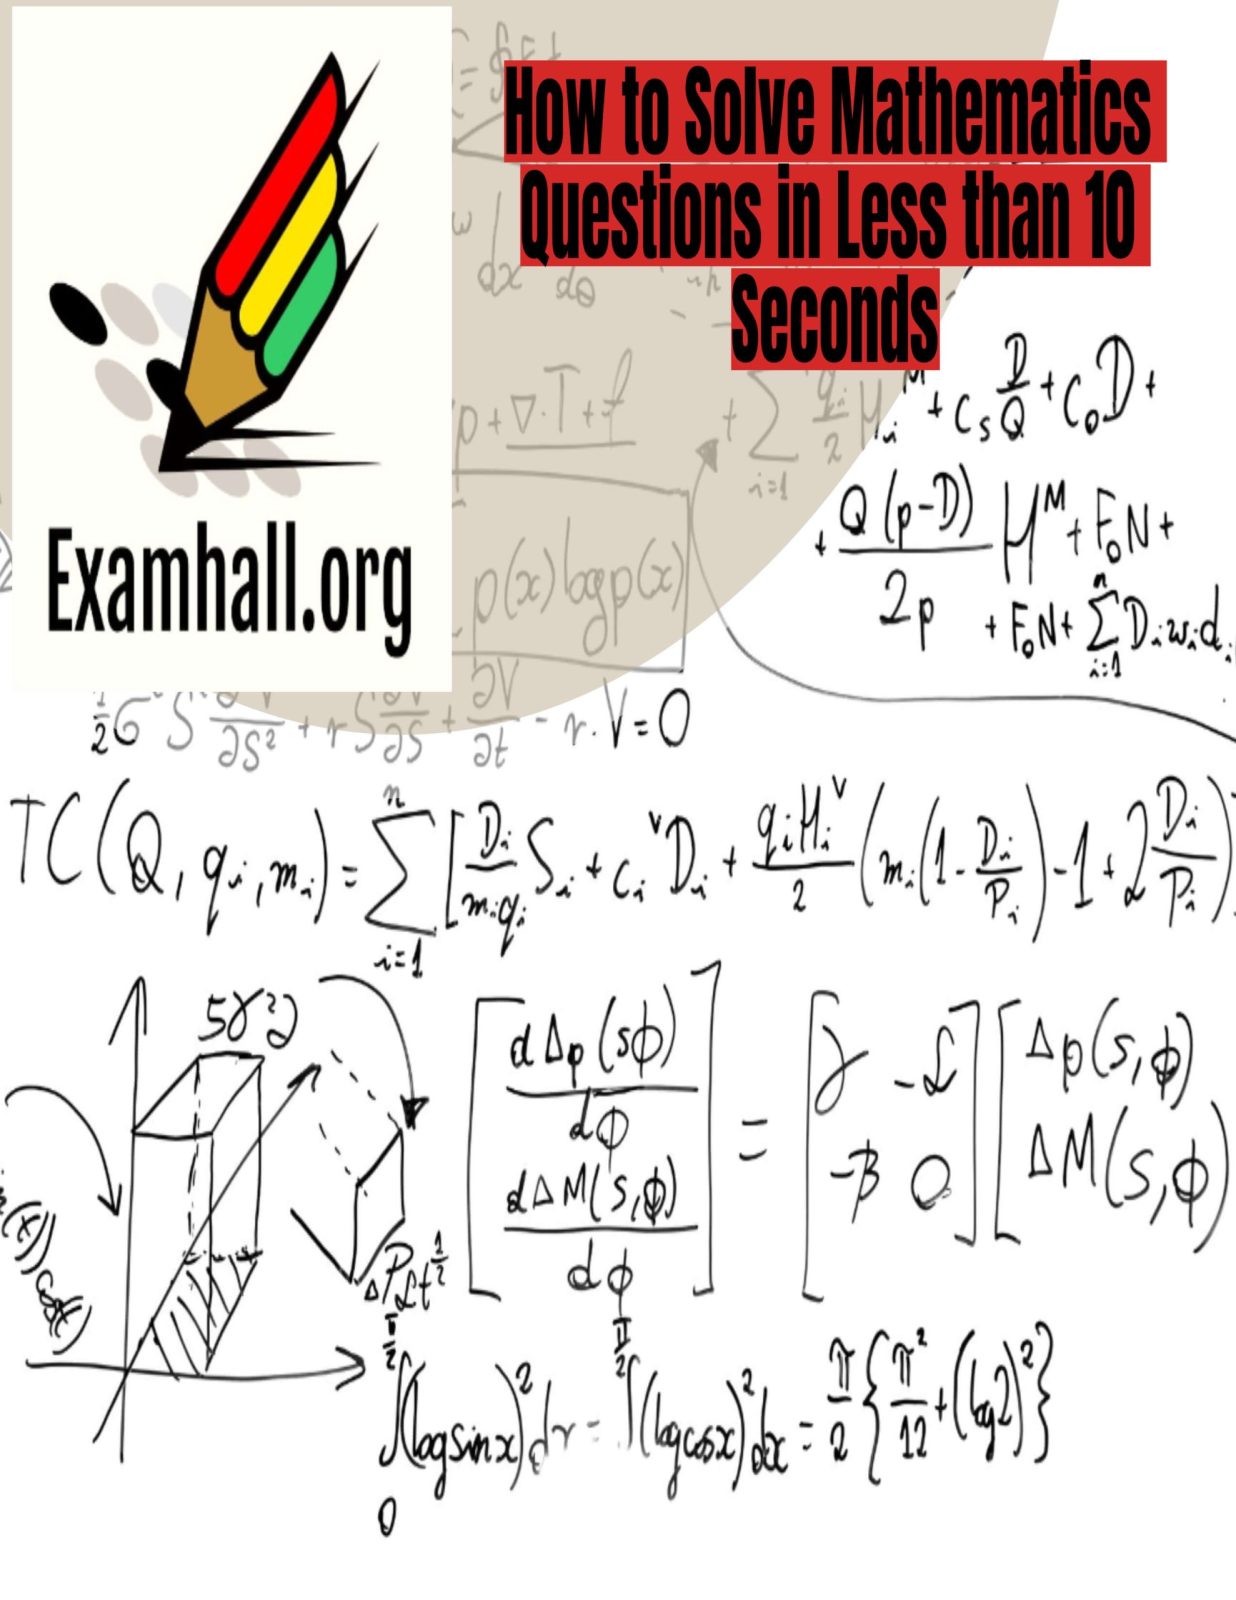 How to Solve Mathematics Questions in Less than 10 Seconds